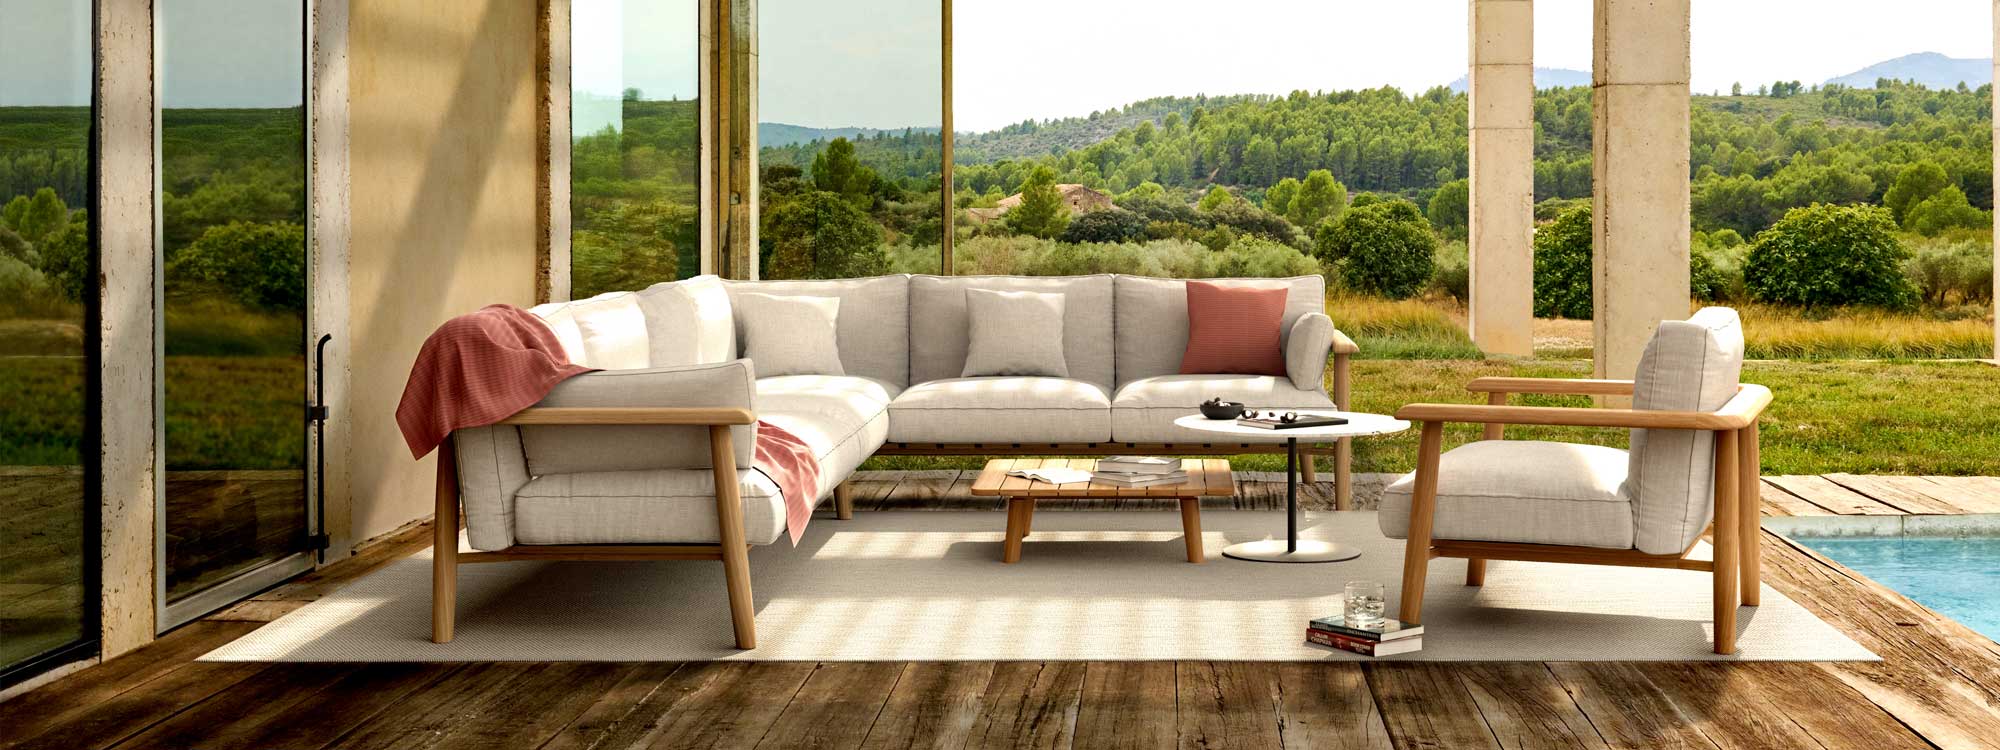 Image of Royal Botania Mambo Lounge teak corner sofa & lounge chair on wooden decking with concrete pillars and wooded hillsides in the background